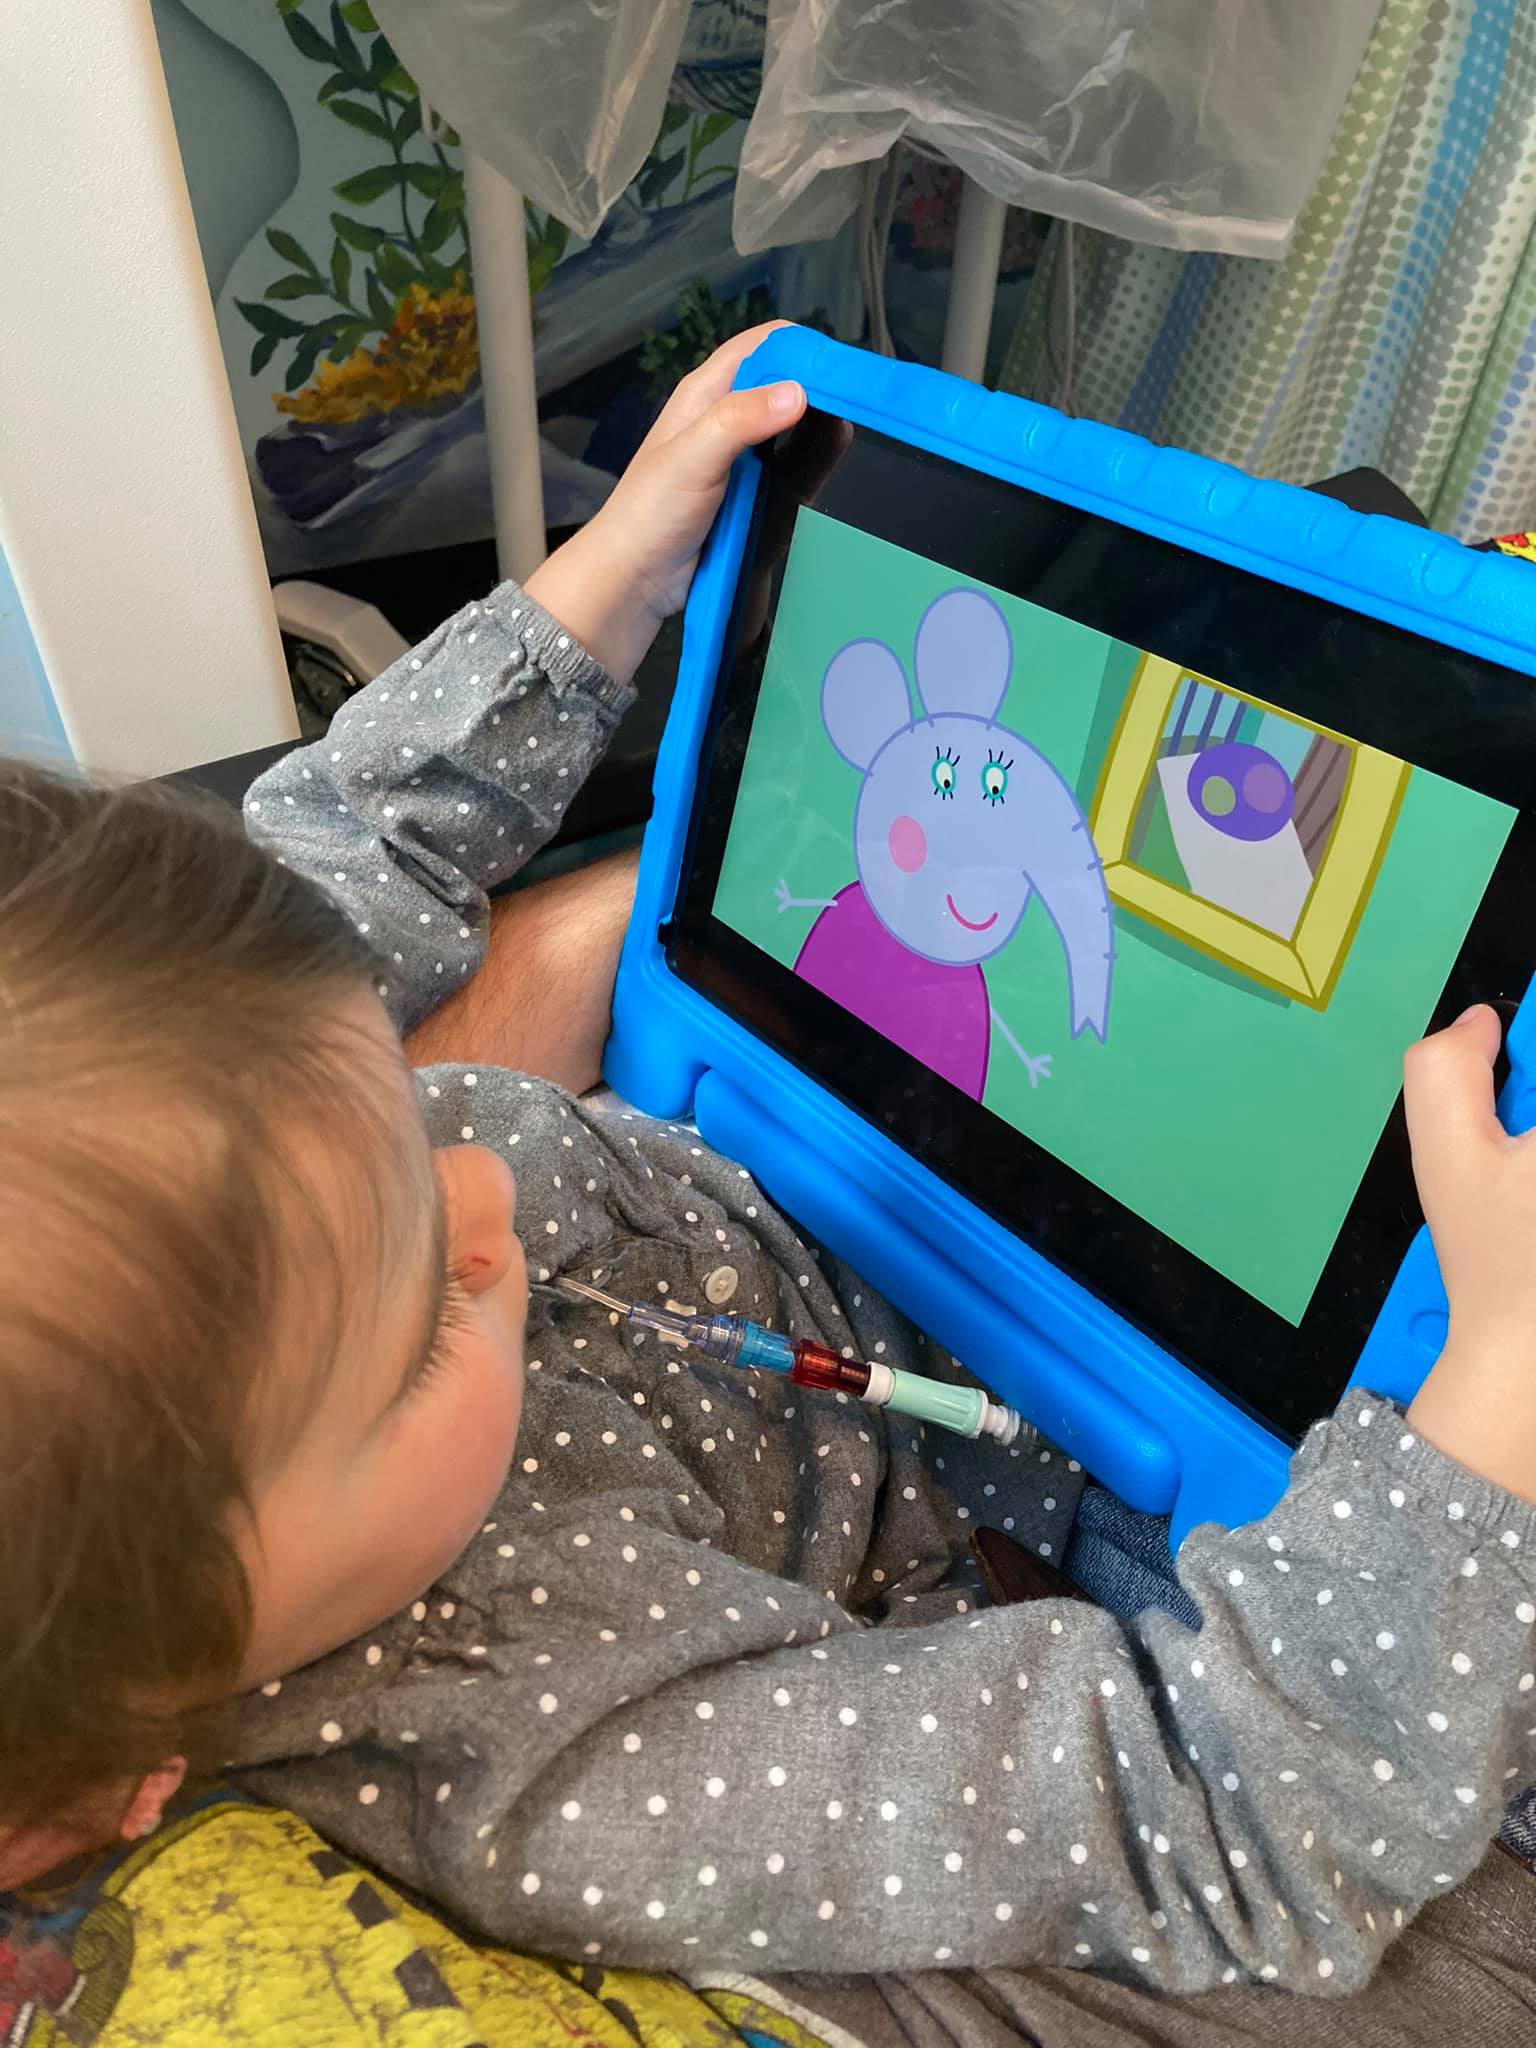 Child sitting on a hospital bed watching a cartoon on her ipad